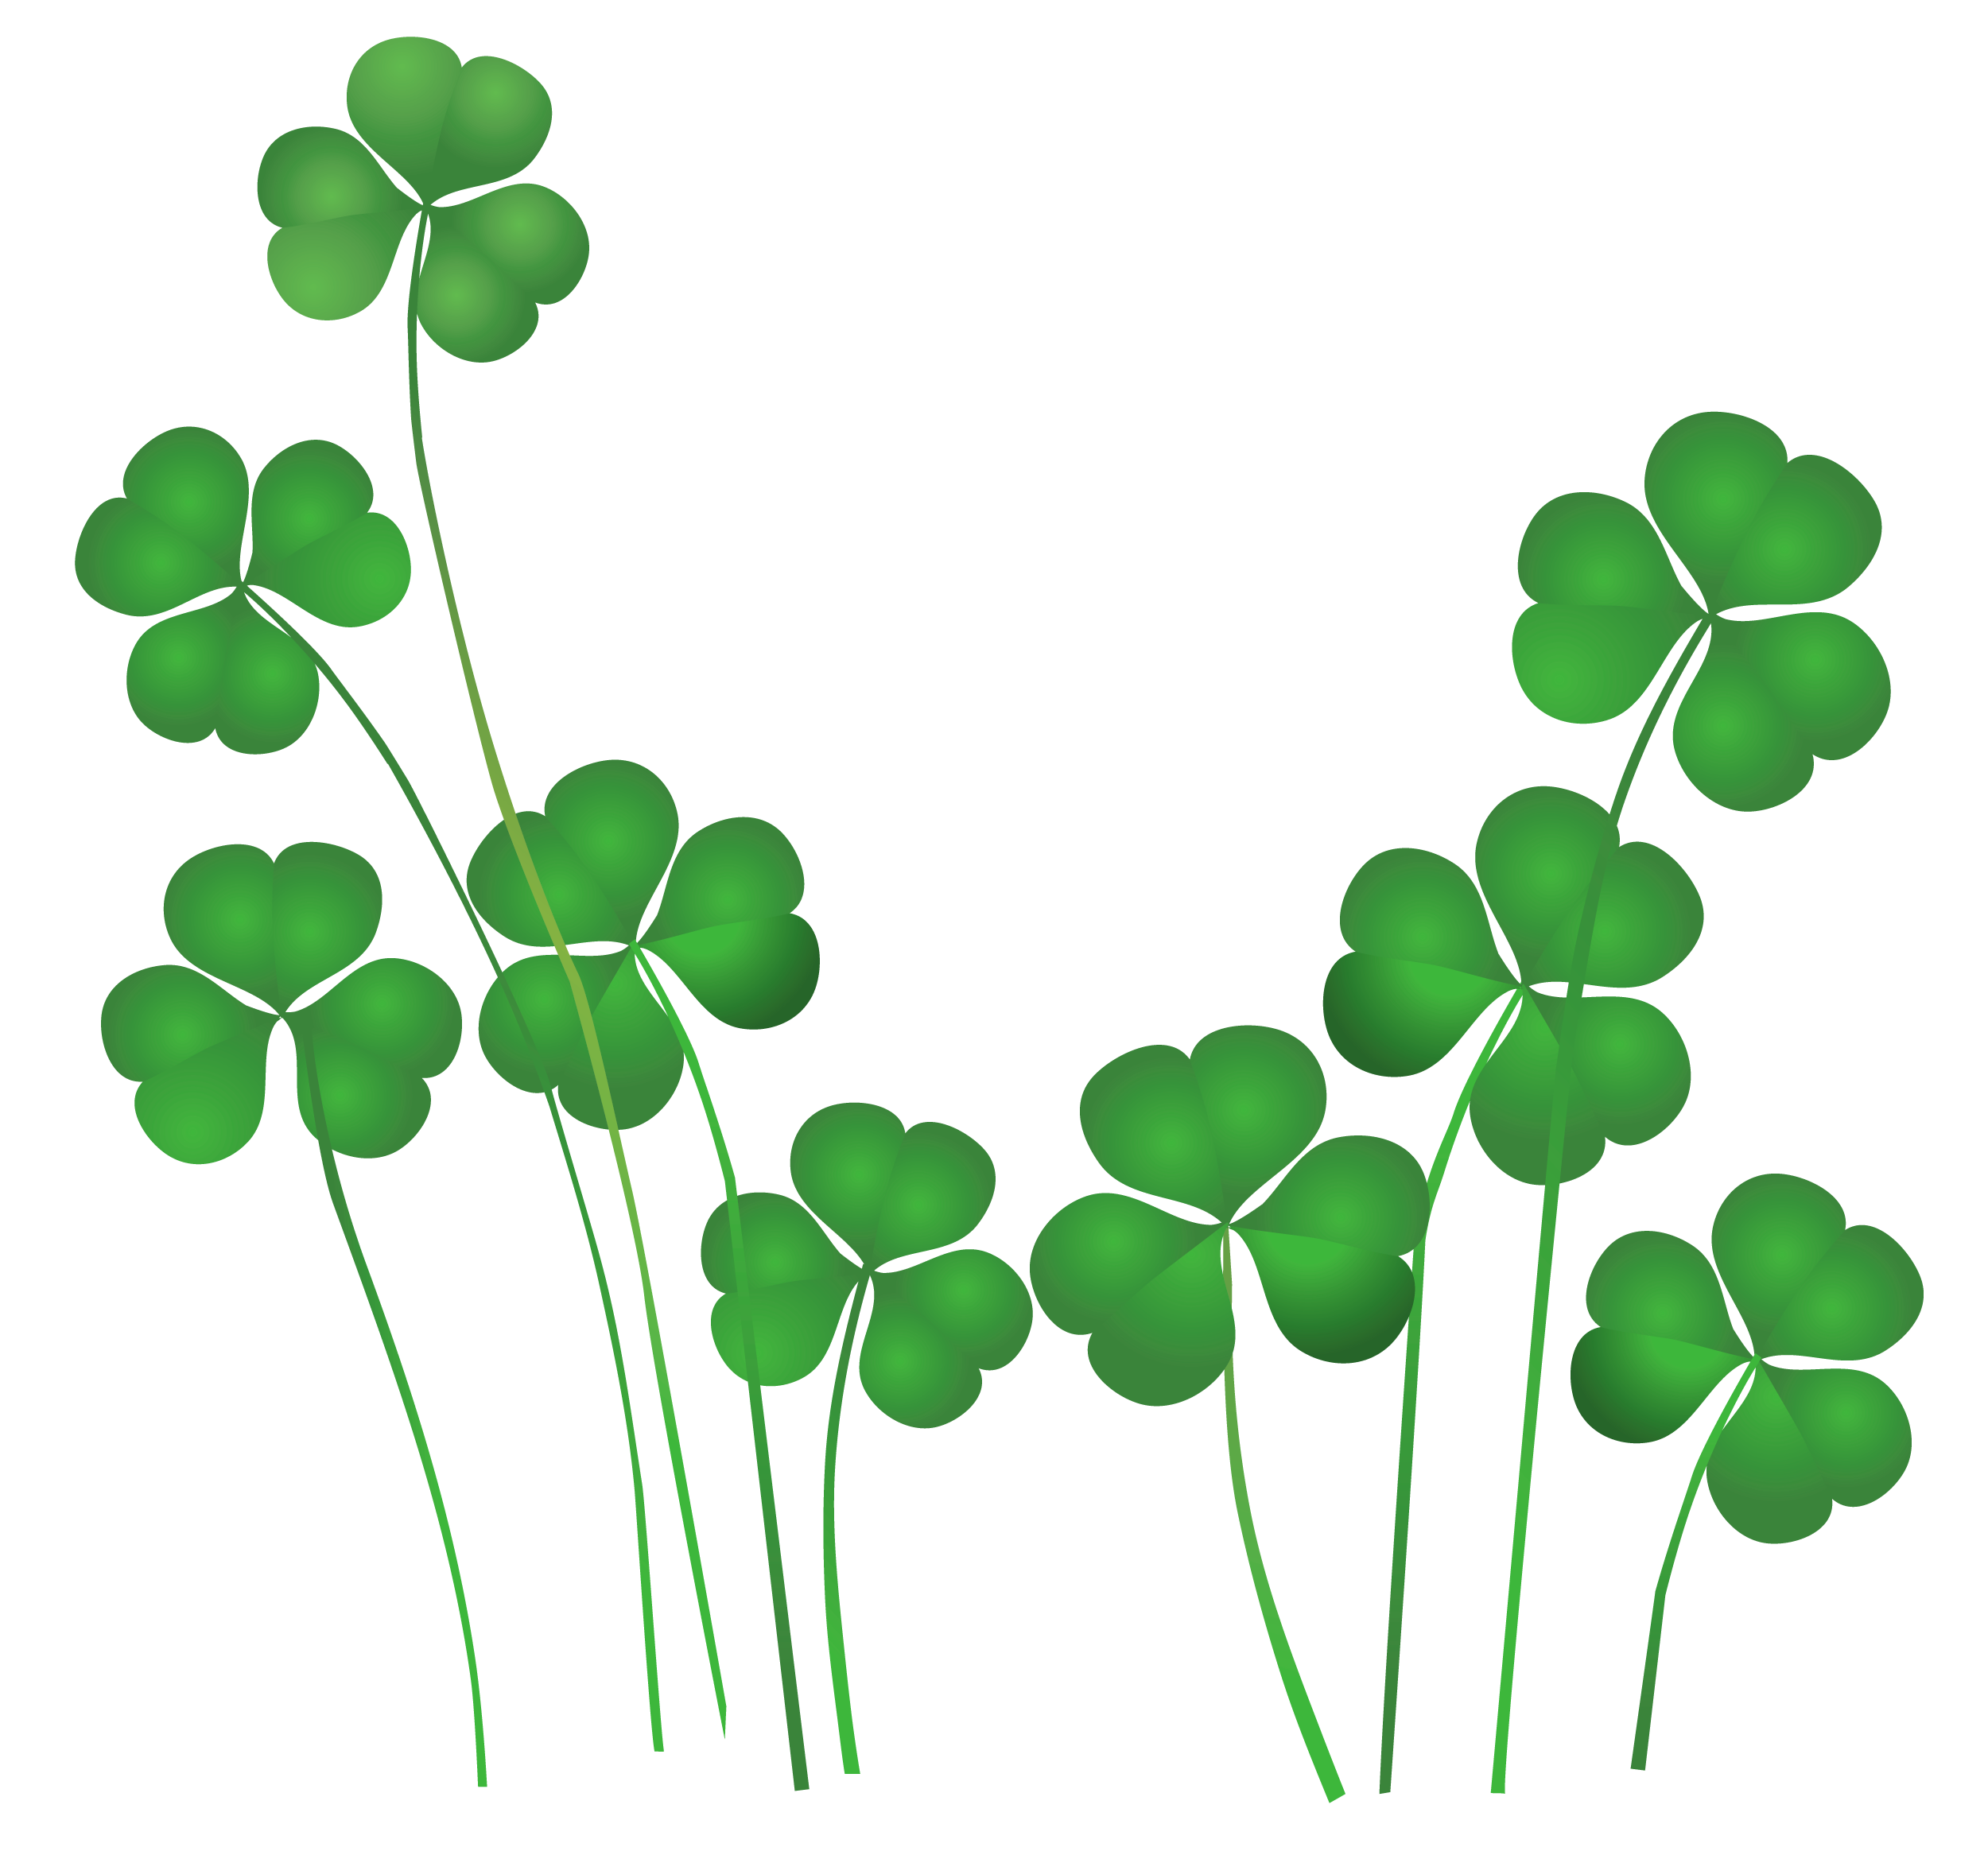 Of Sea Lions, Shamrocks, St. Patrick, Snakes and Spring  St patricks day  wallpaper, Saint patricks day art, Shamrock pictures